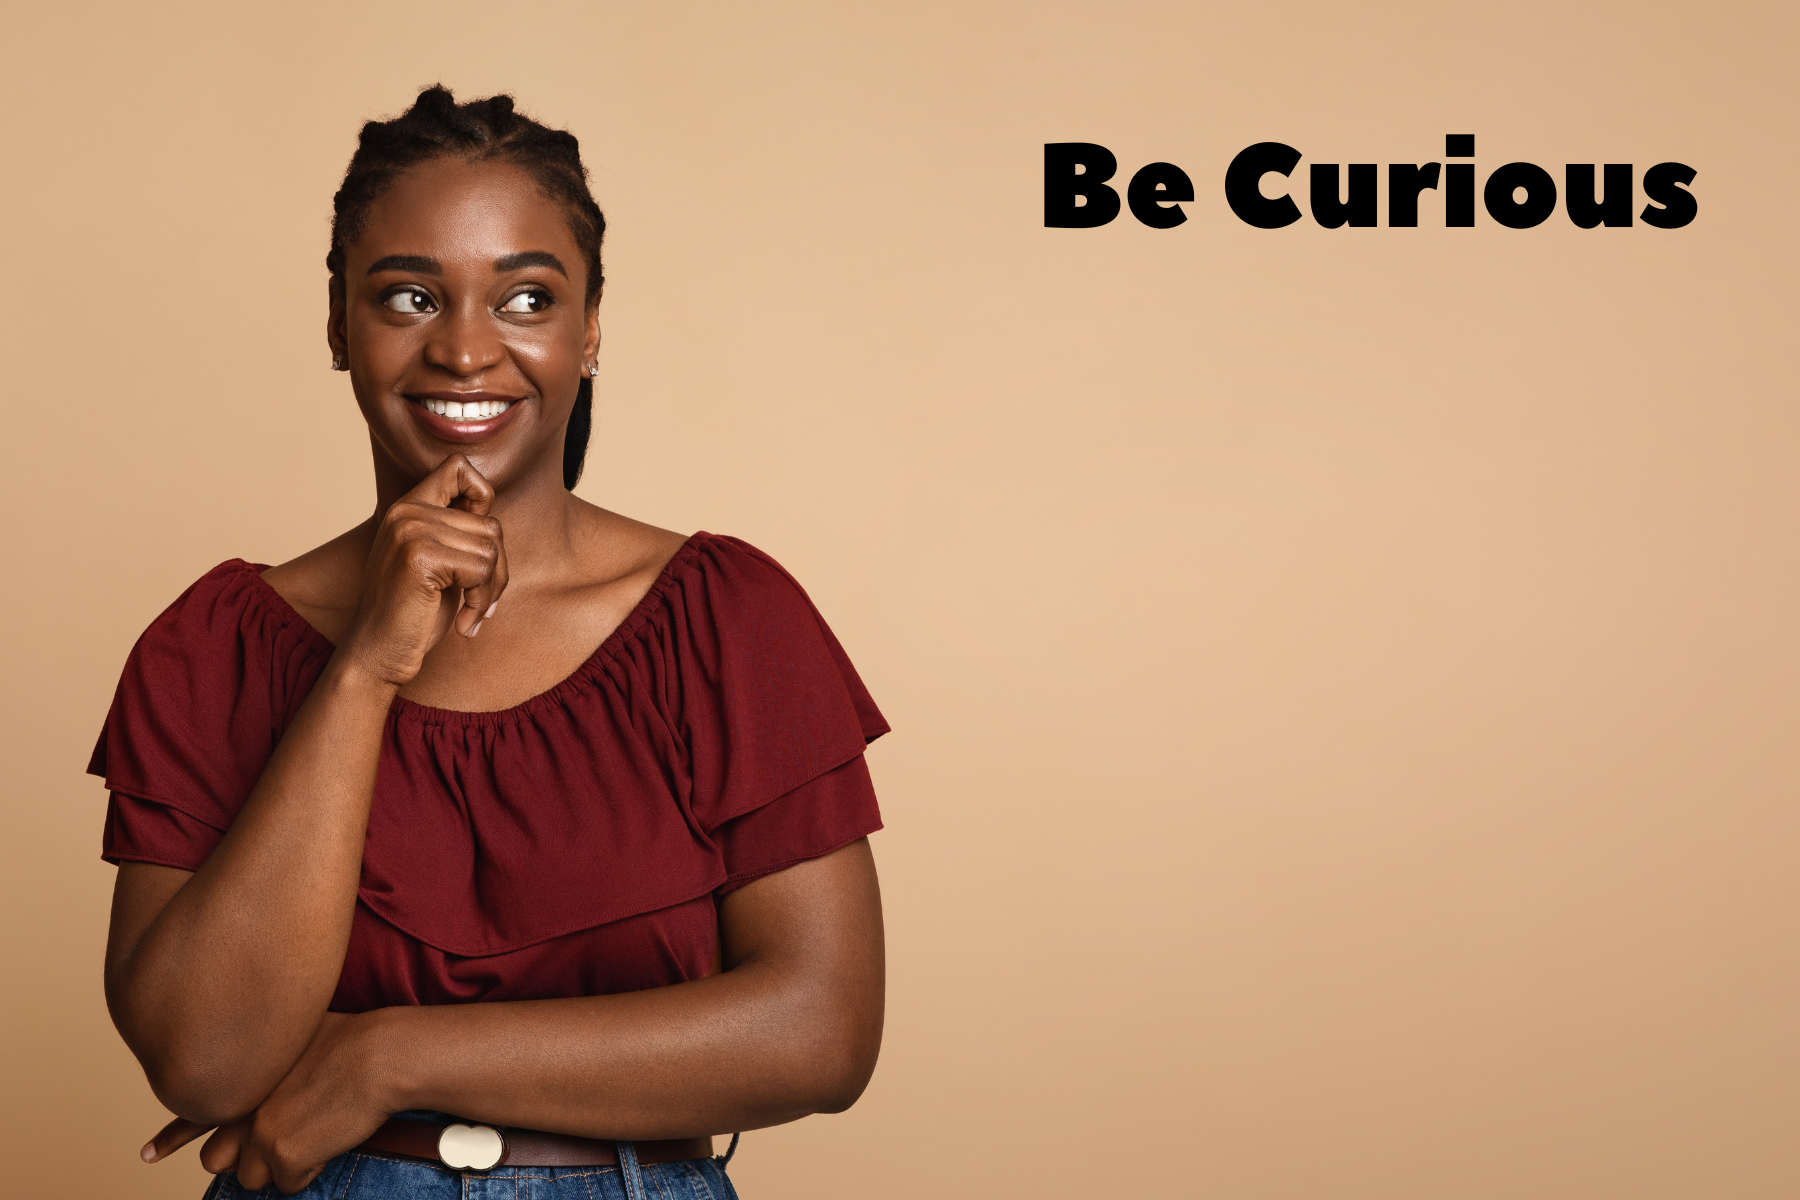 Woman in t-shirt grabbing her chin and smiling - text states 'be curious'